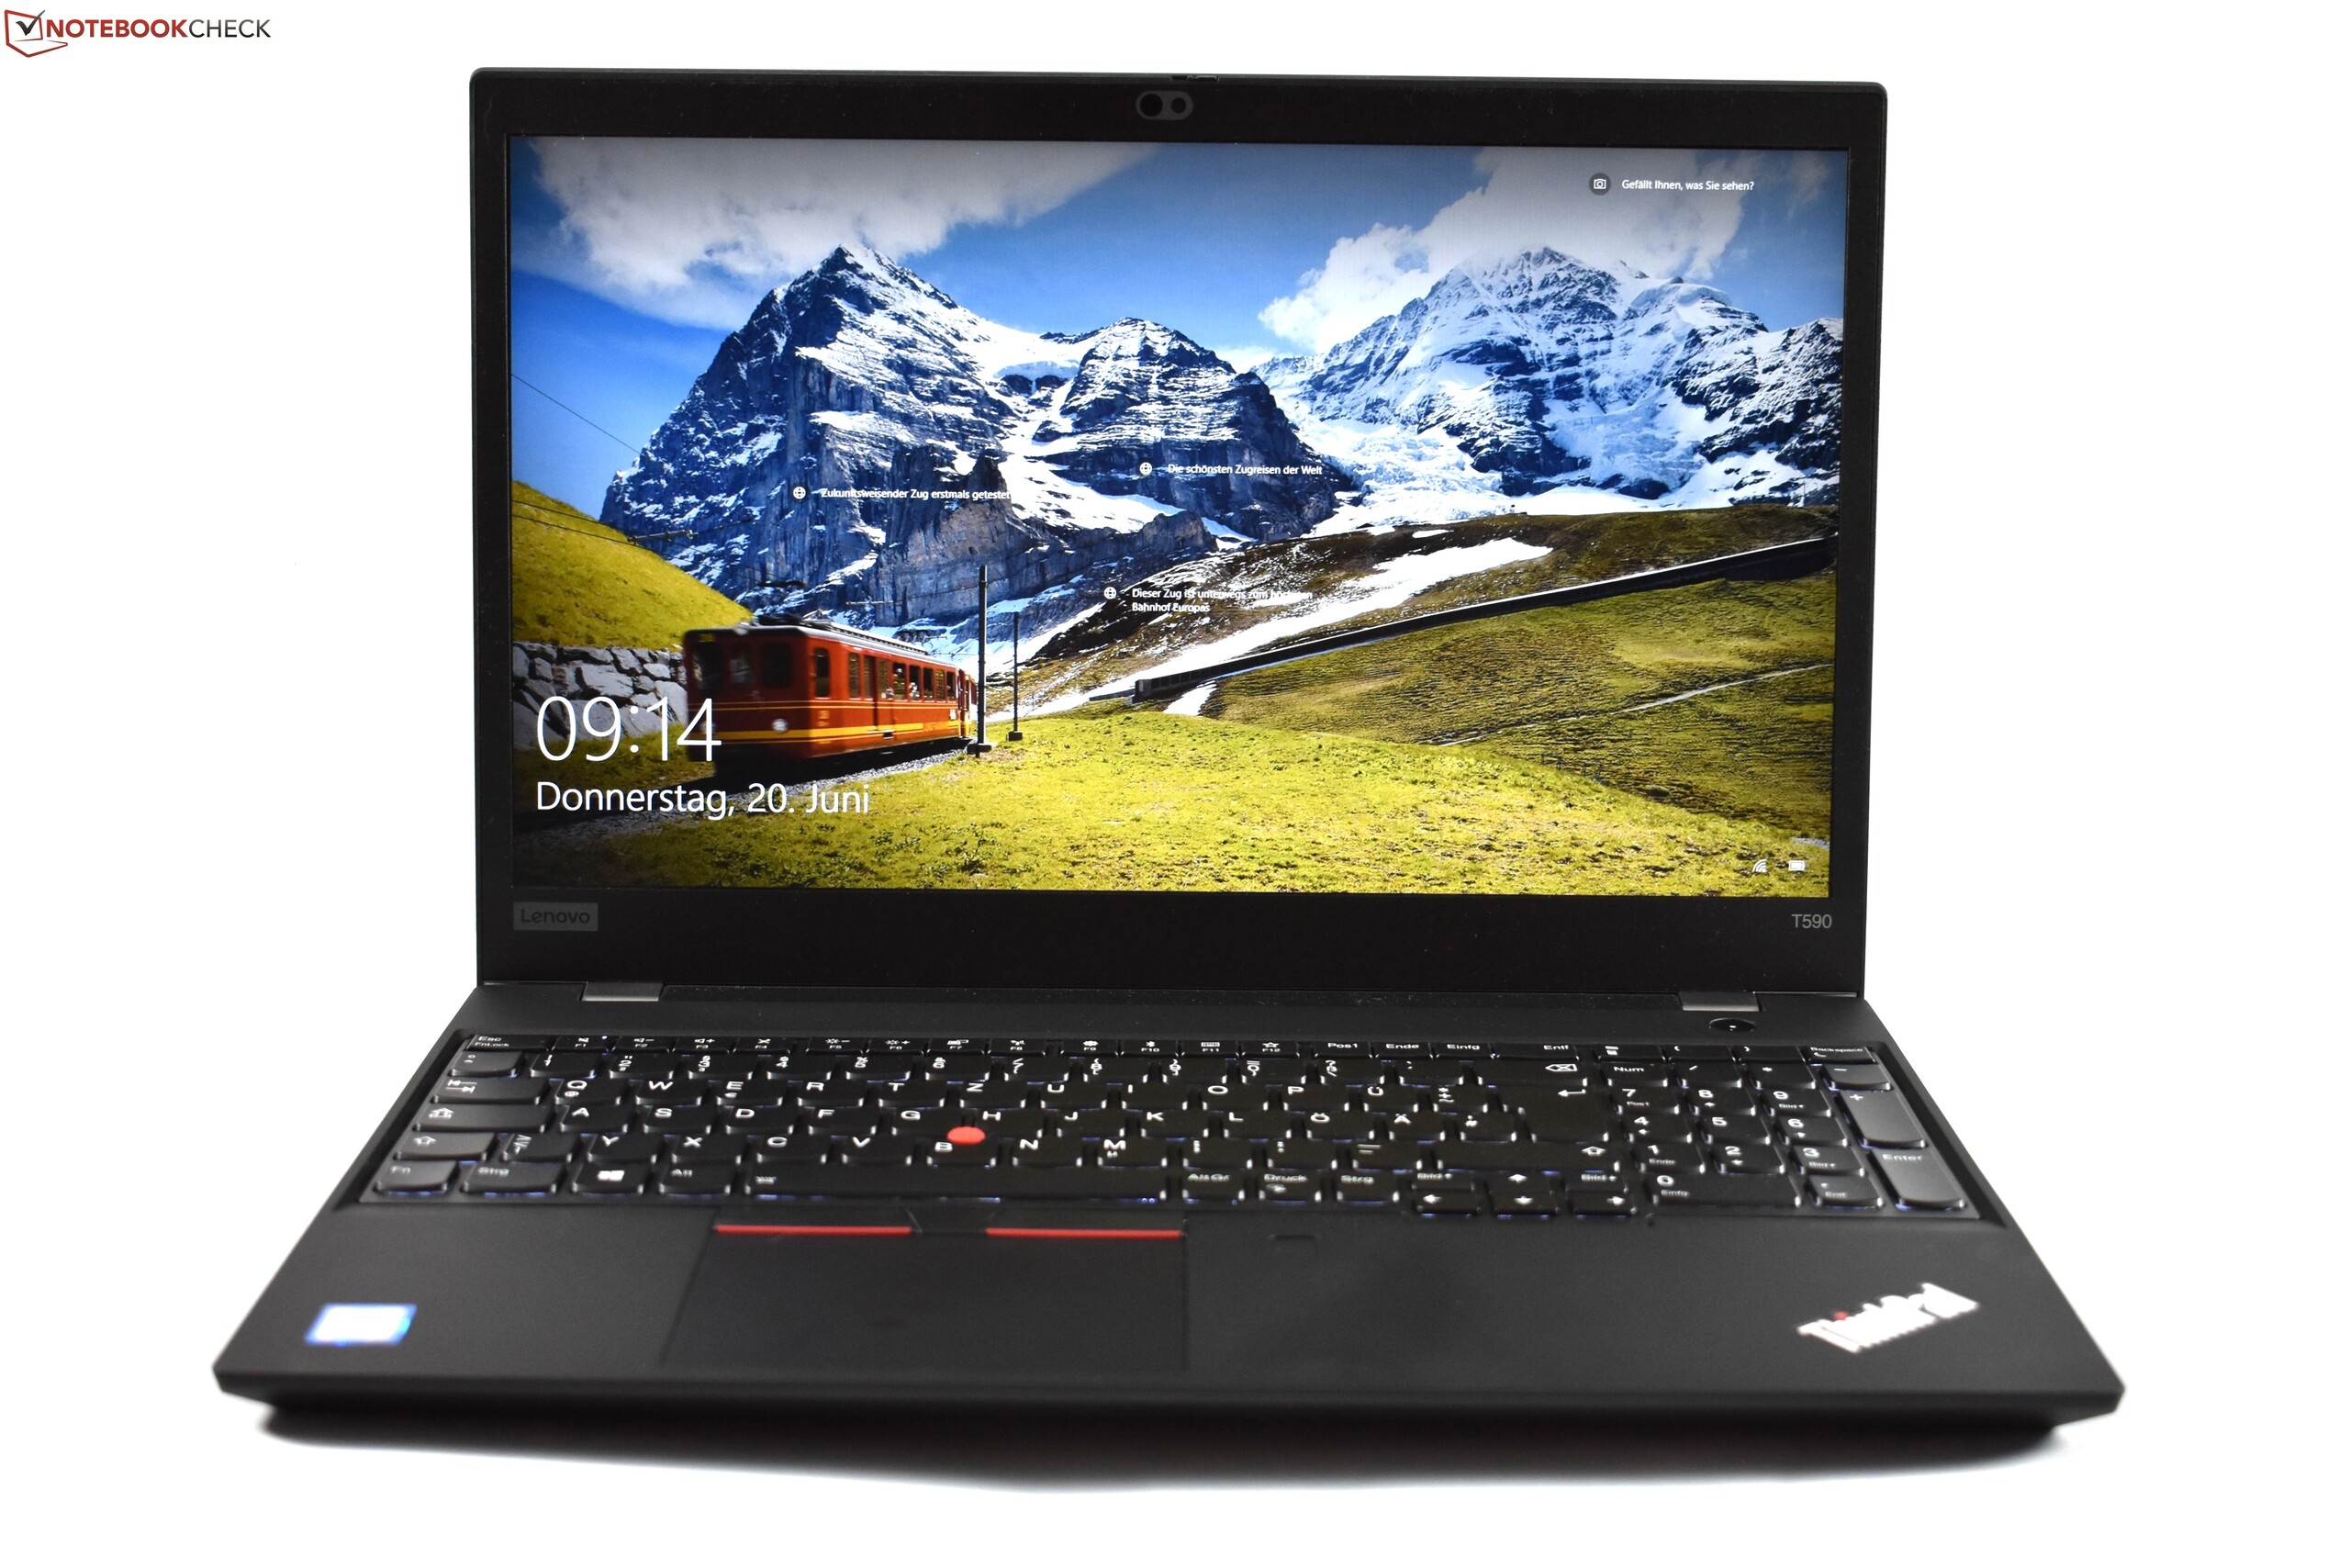 Lenovo ThinkPad T590 laptop review: The 4K display offers